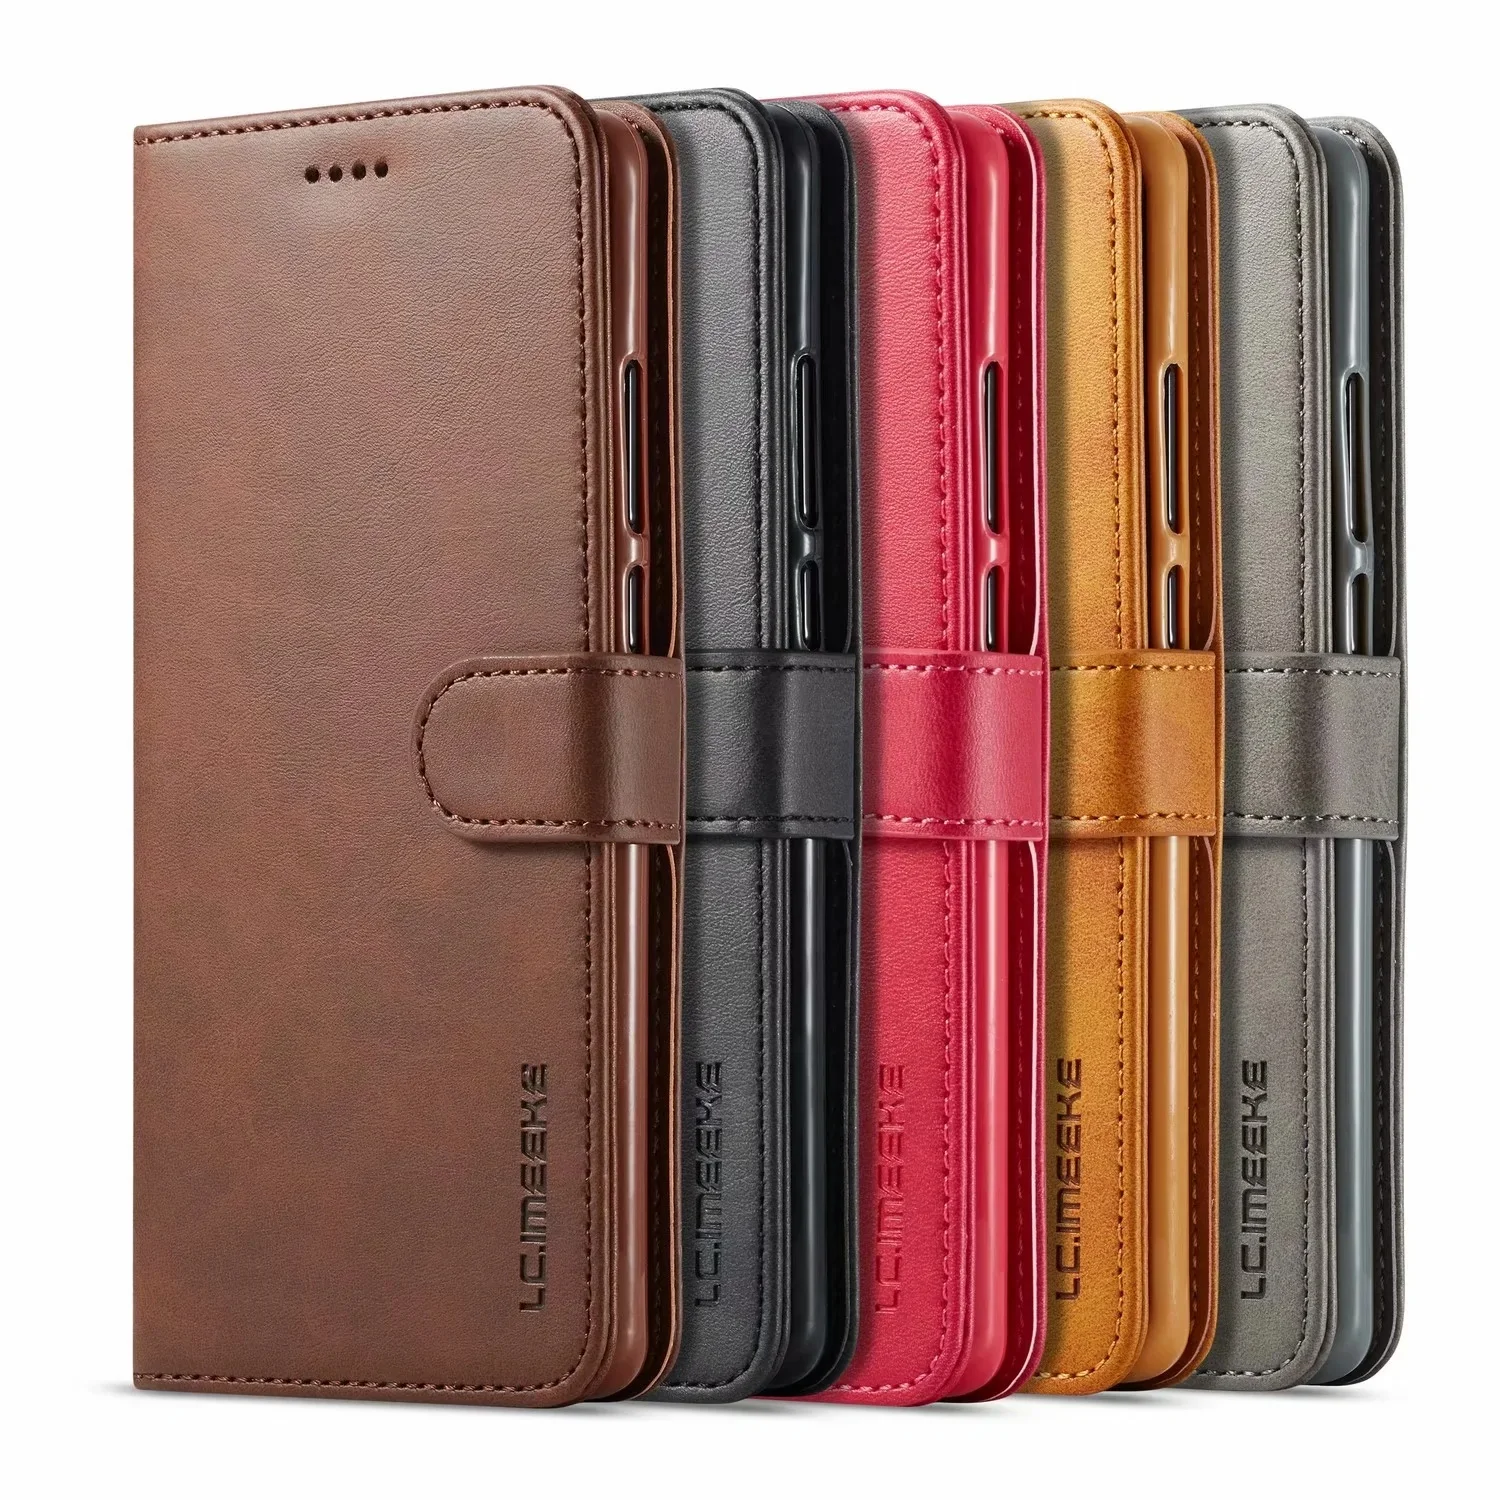 

Luxury Leather Case for HUAWEI P40 P30 P20 Pro Lite P Smart 2019 Wallet Flip Cover Mate 10 20 30 Pro Lite Y5 Y9 with Card Slots